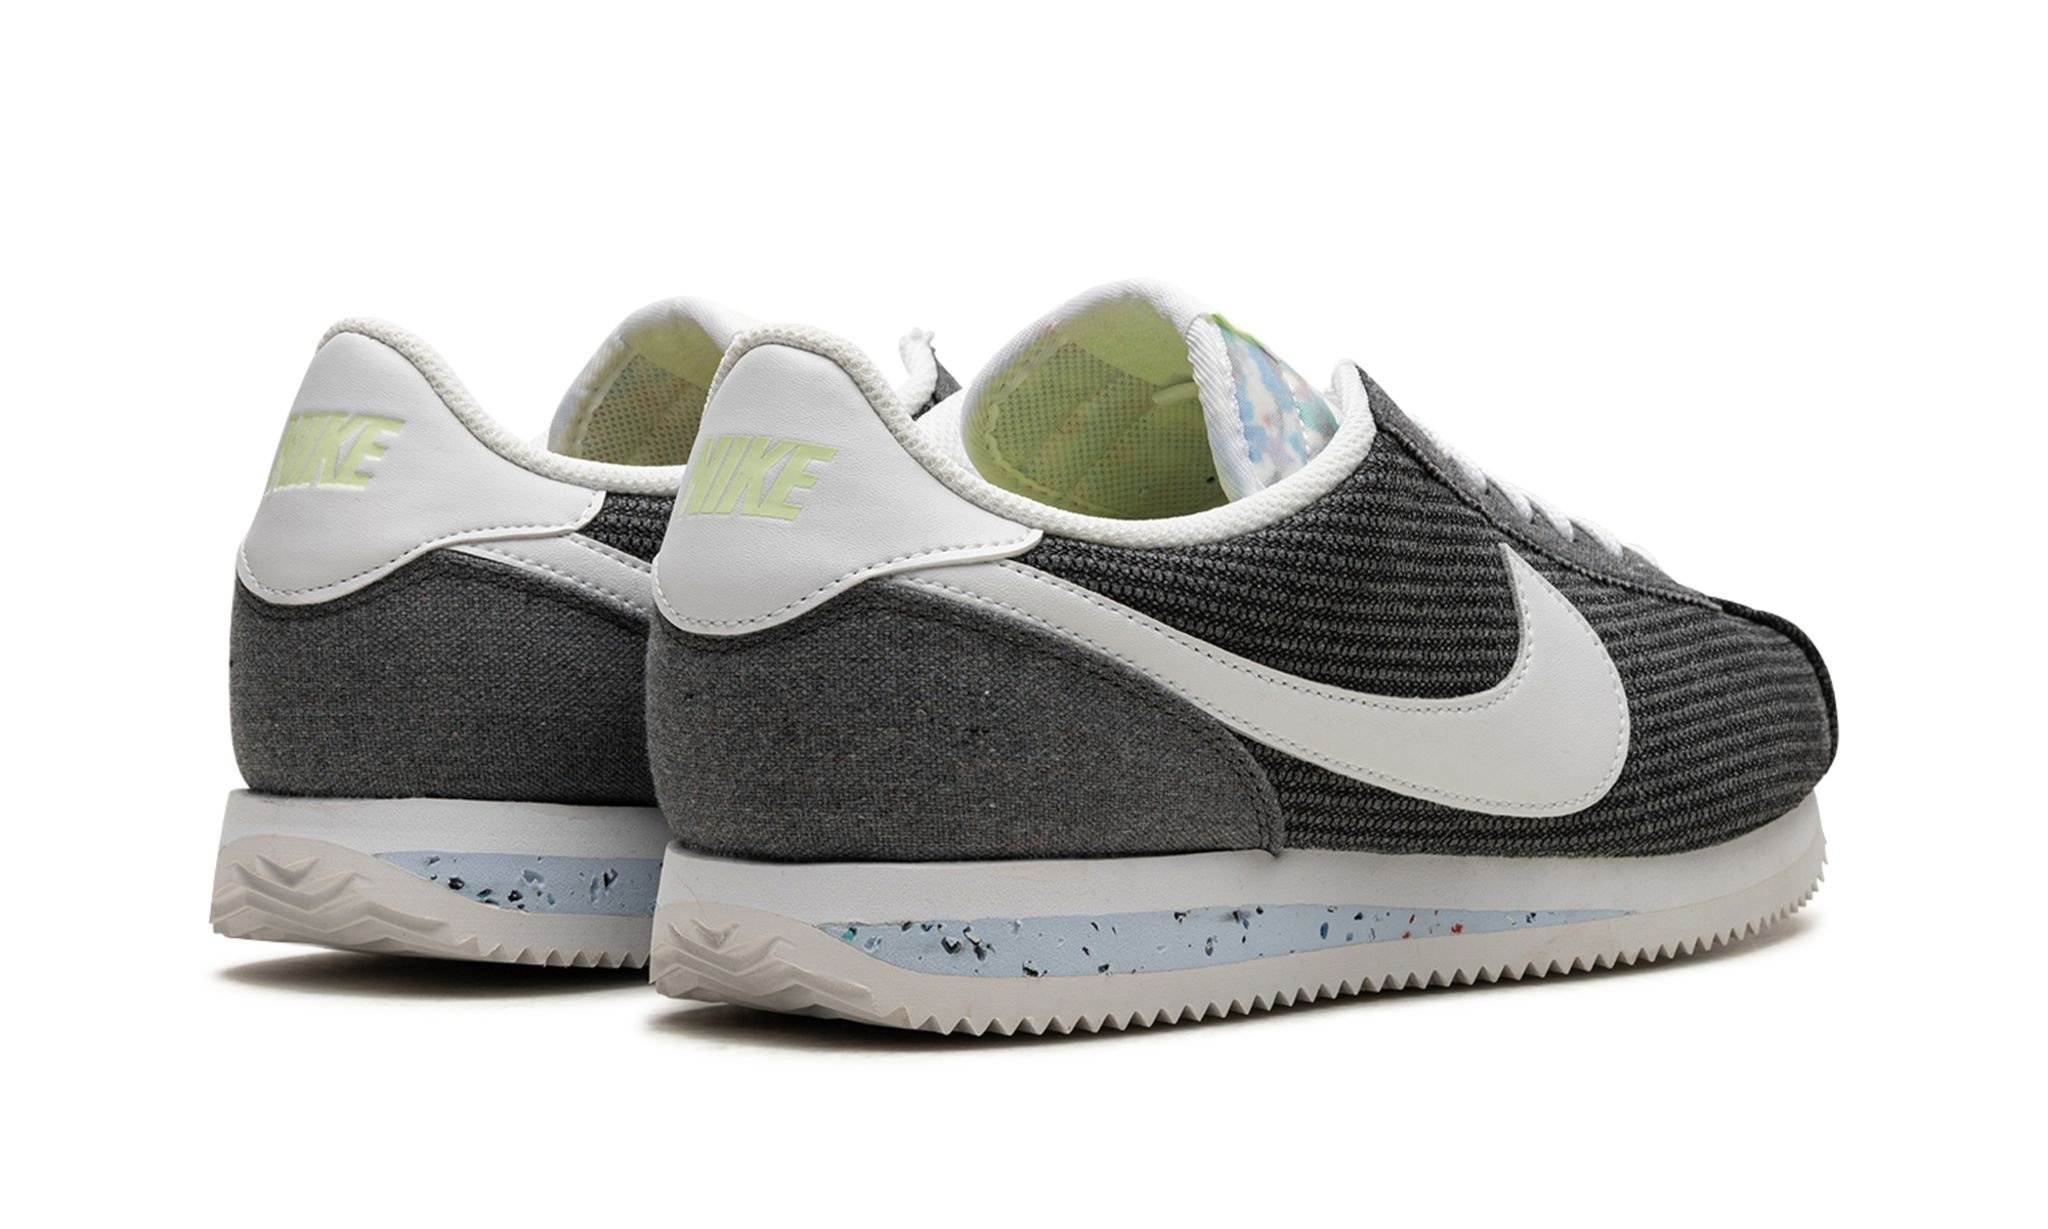 Classic Cortez "Recycled Canvas" - 3